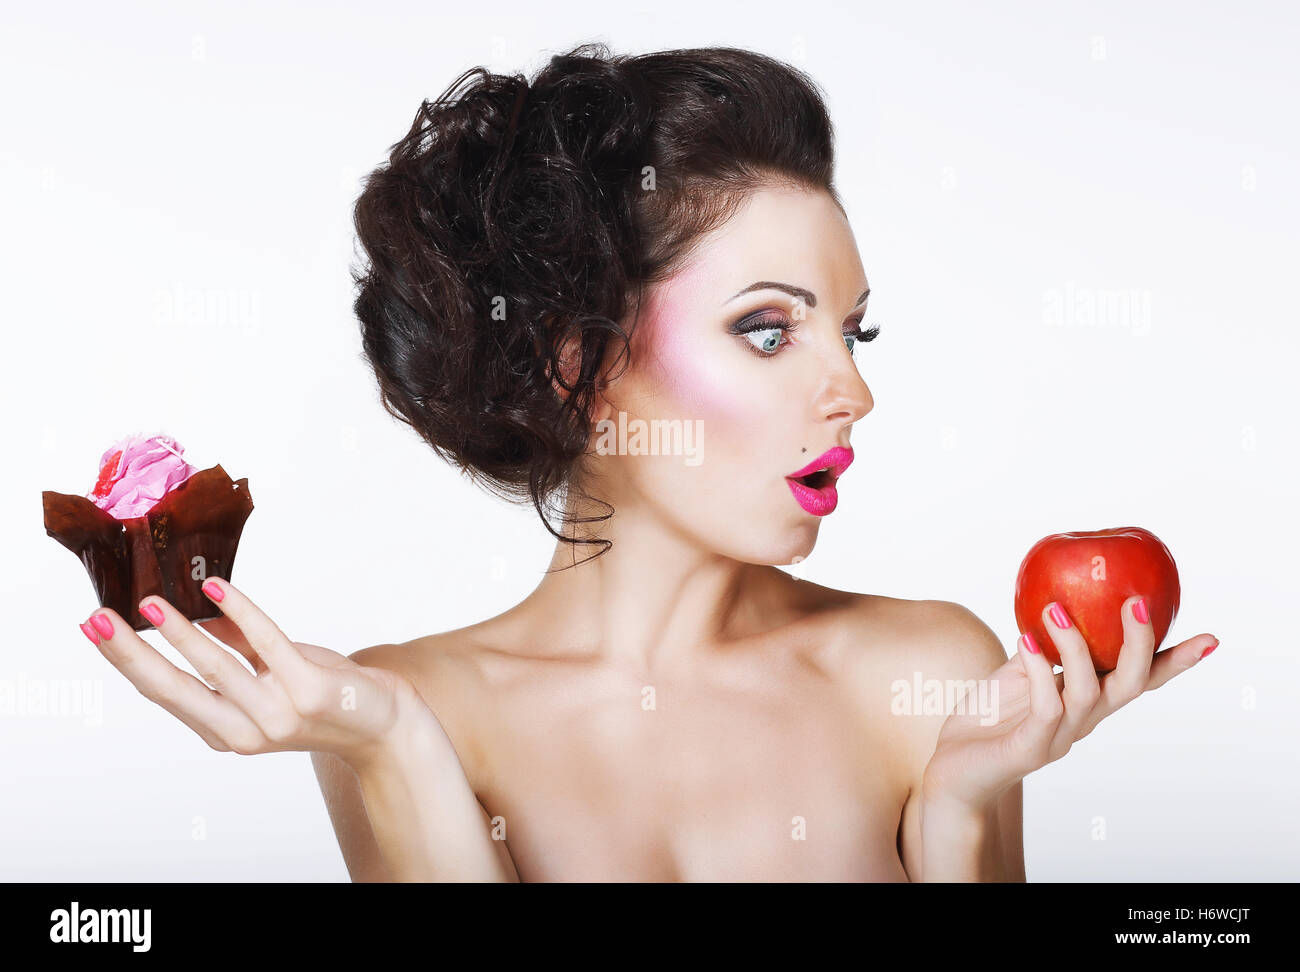 woman food aliment sweets fashion lifestyle face person pastry fruit adult cake pie cakes shoulders hungry diet cream candy Stock Photo